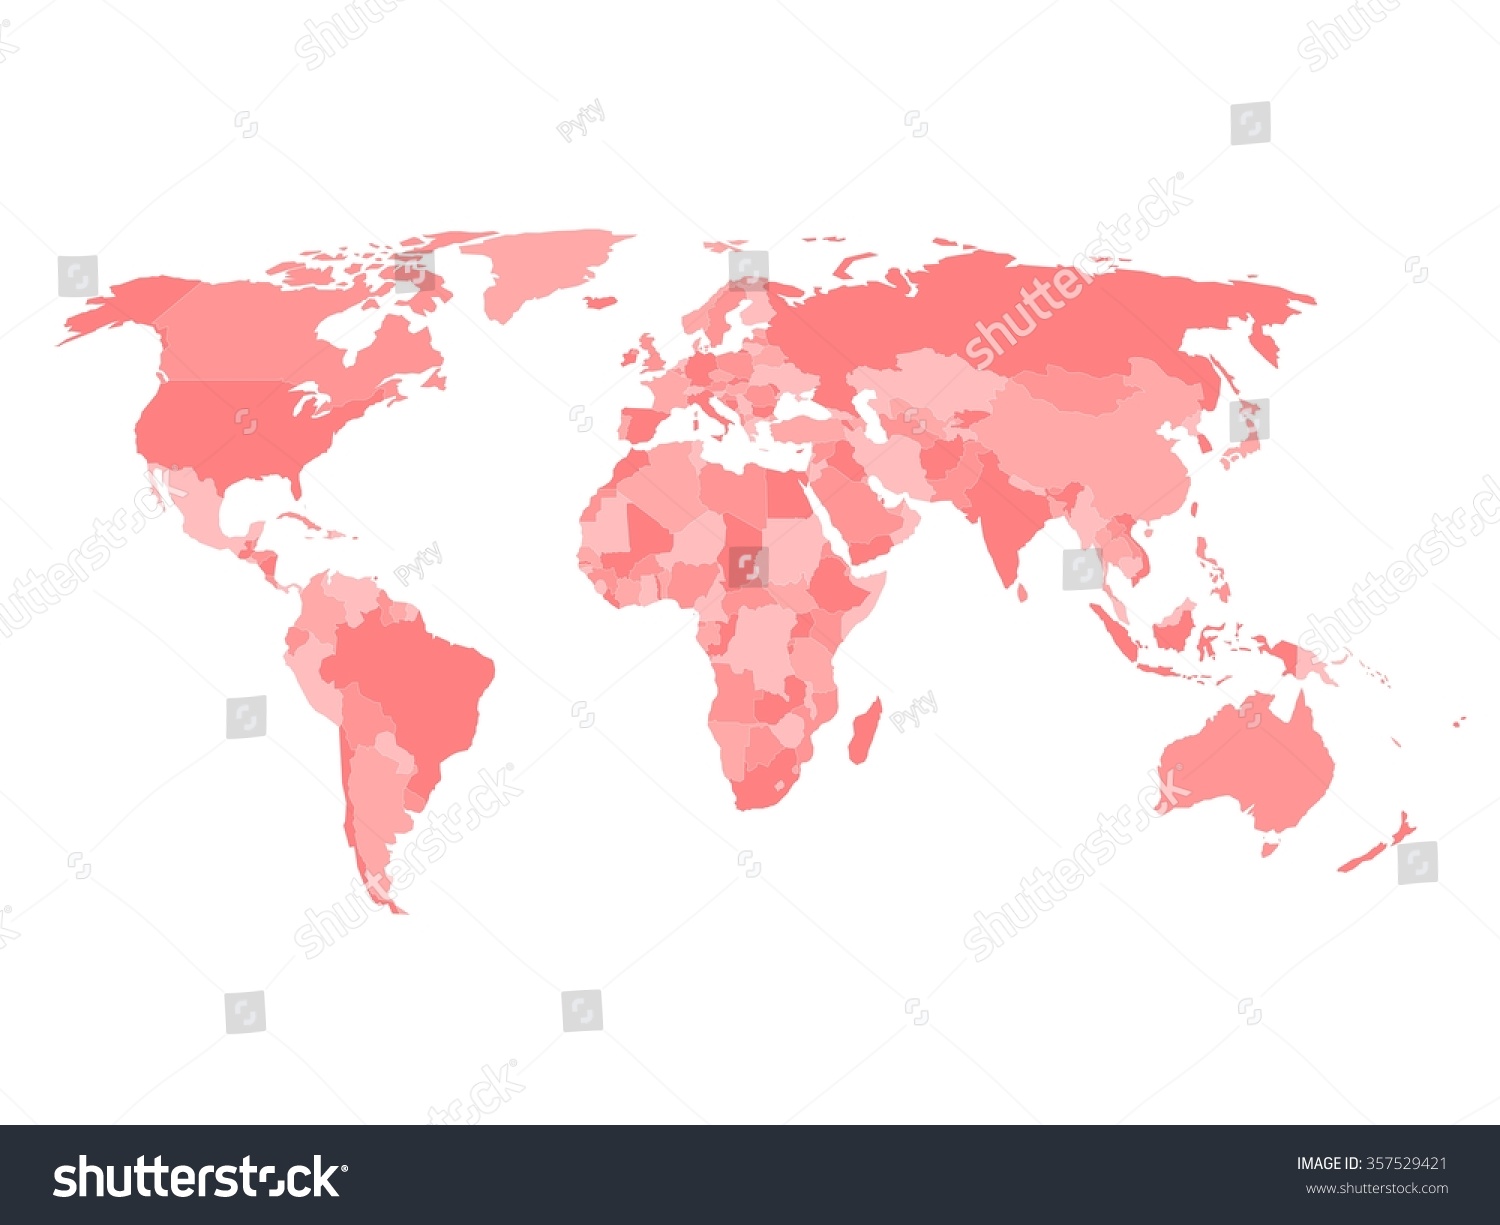 Blank political map of world in four shades of red and white background. Simplified vector map. #357529421